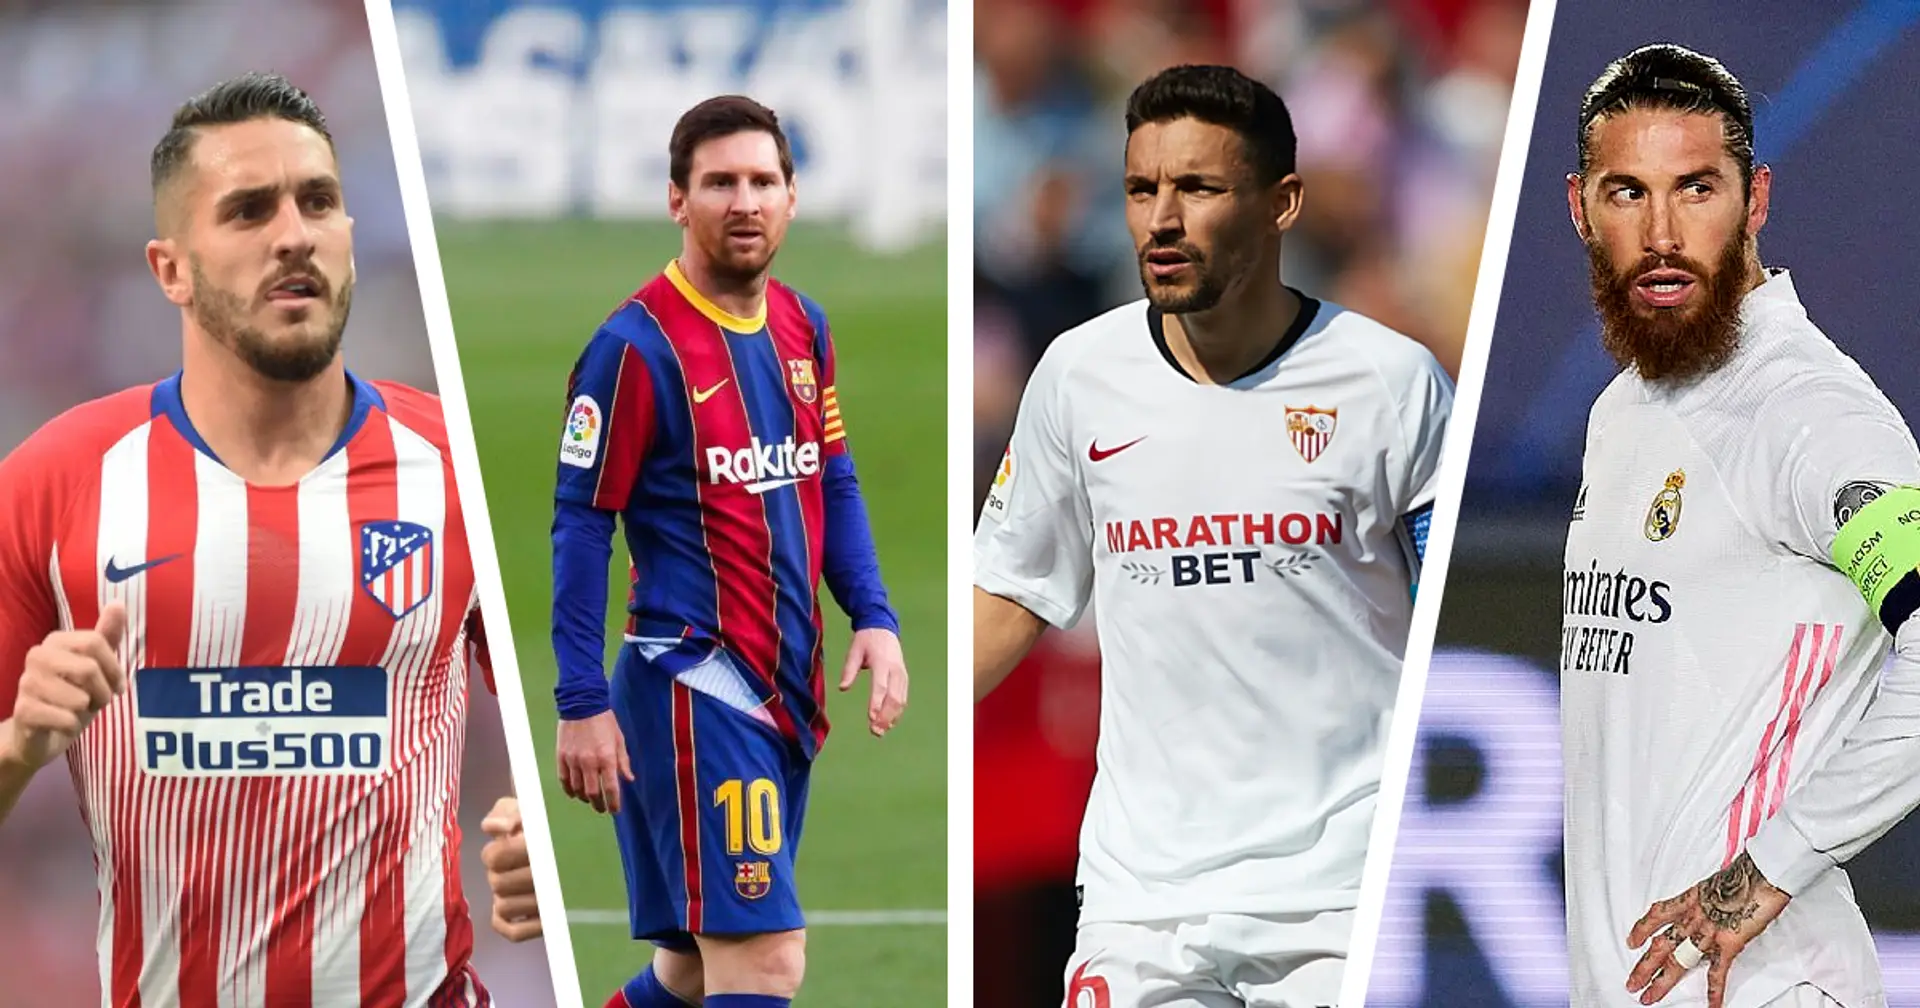 The most Liga campaign in history: Only 3 points separate the top 4 teams - Football | Tribuna.com